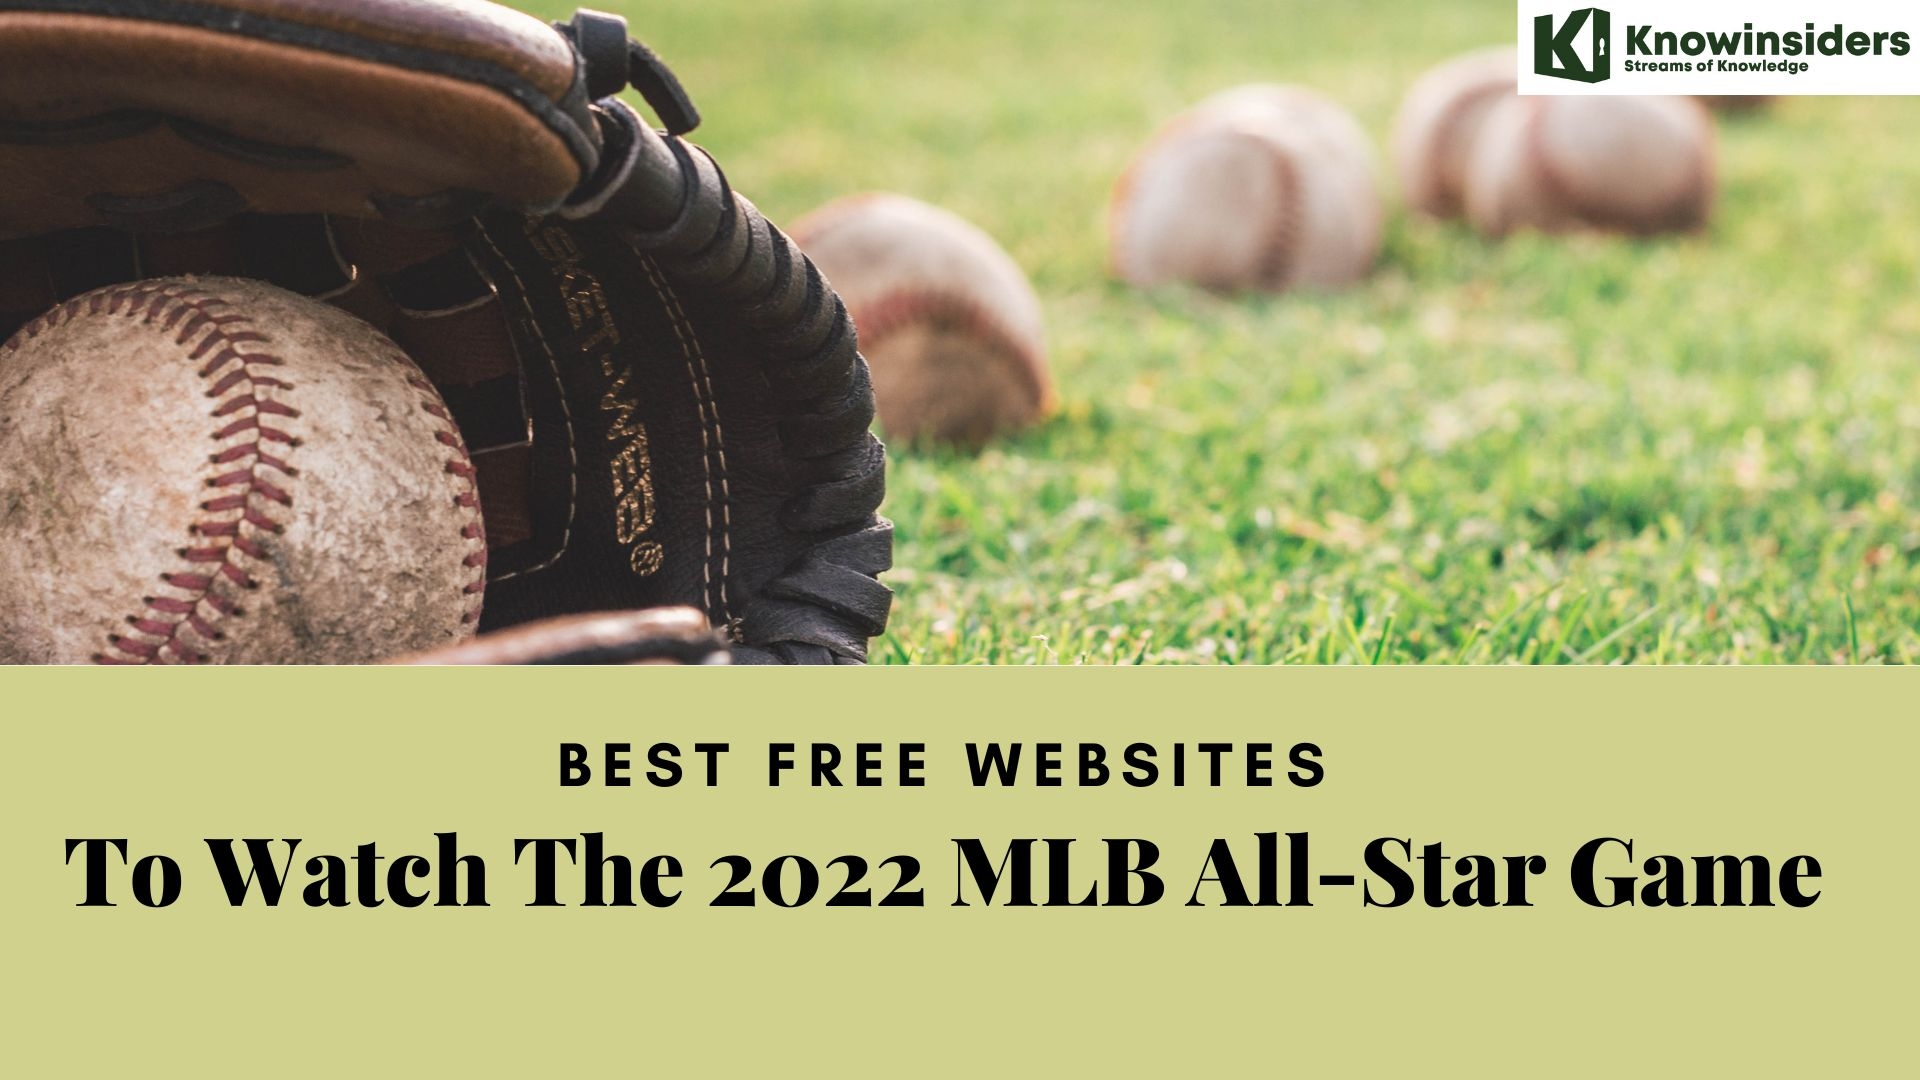 Best Free Websites To Watch Live MLB All-Star Games Online